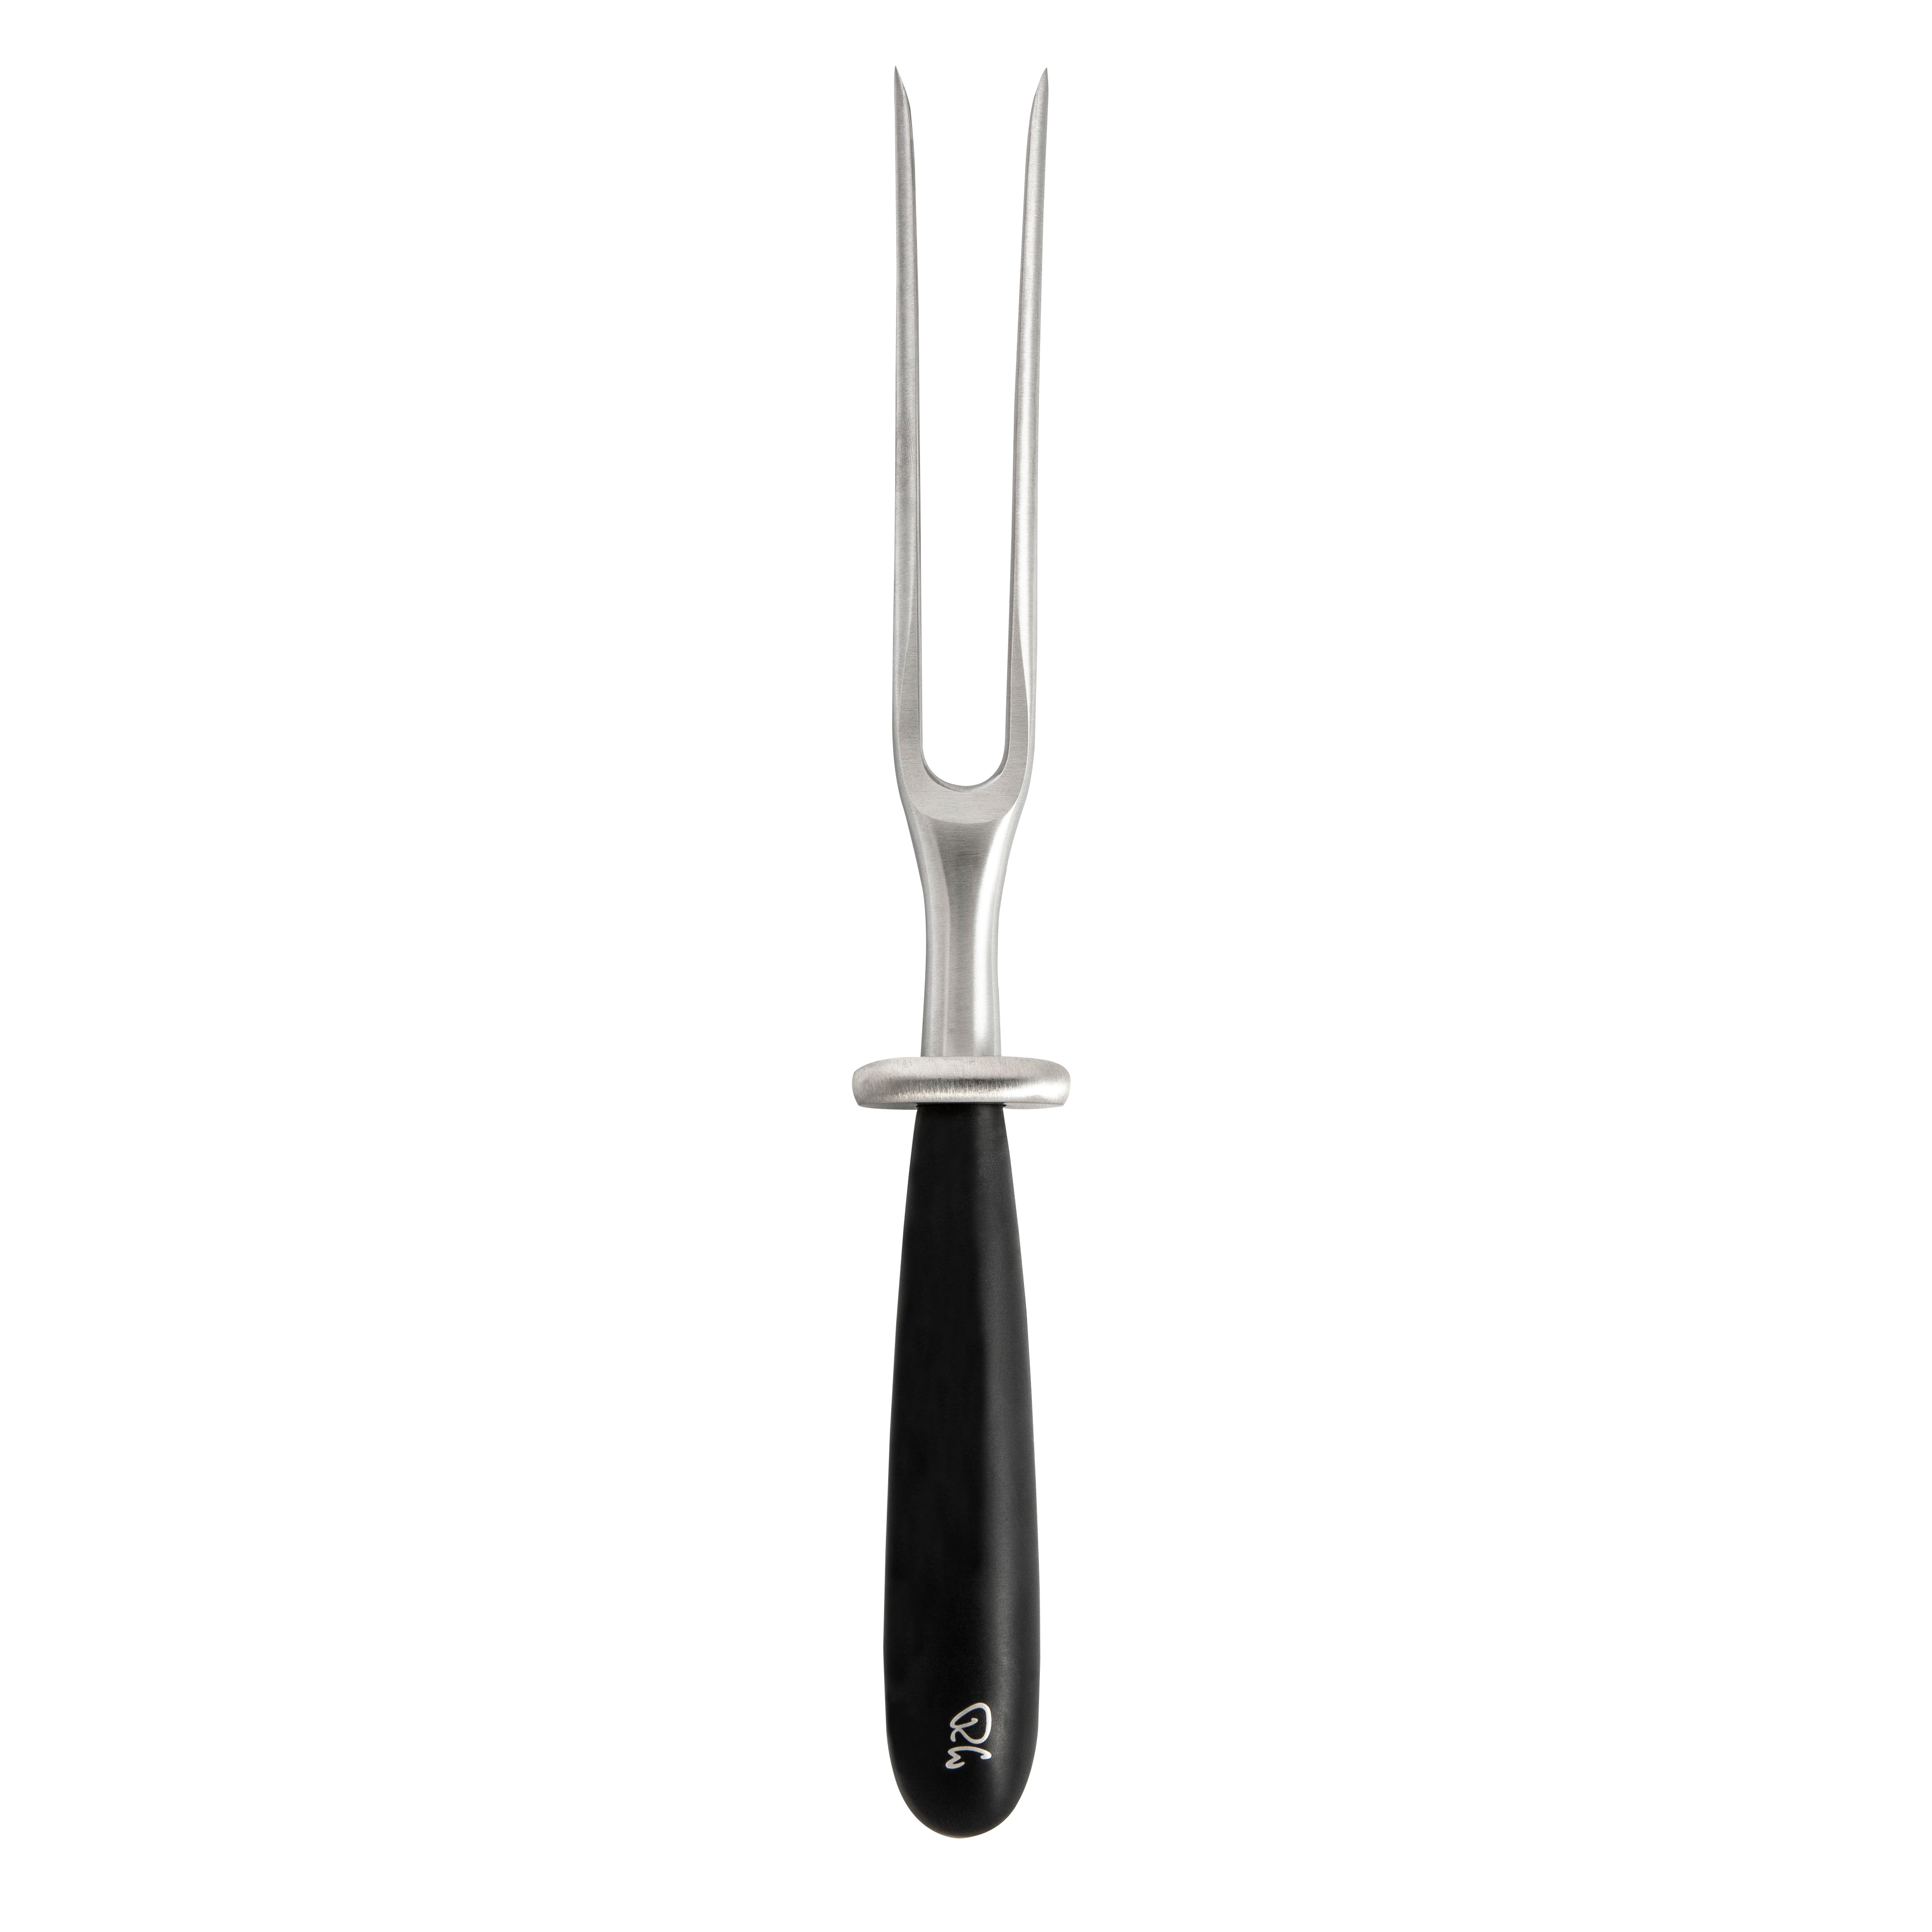 Robert Welch Signature 18cm Carving Fork